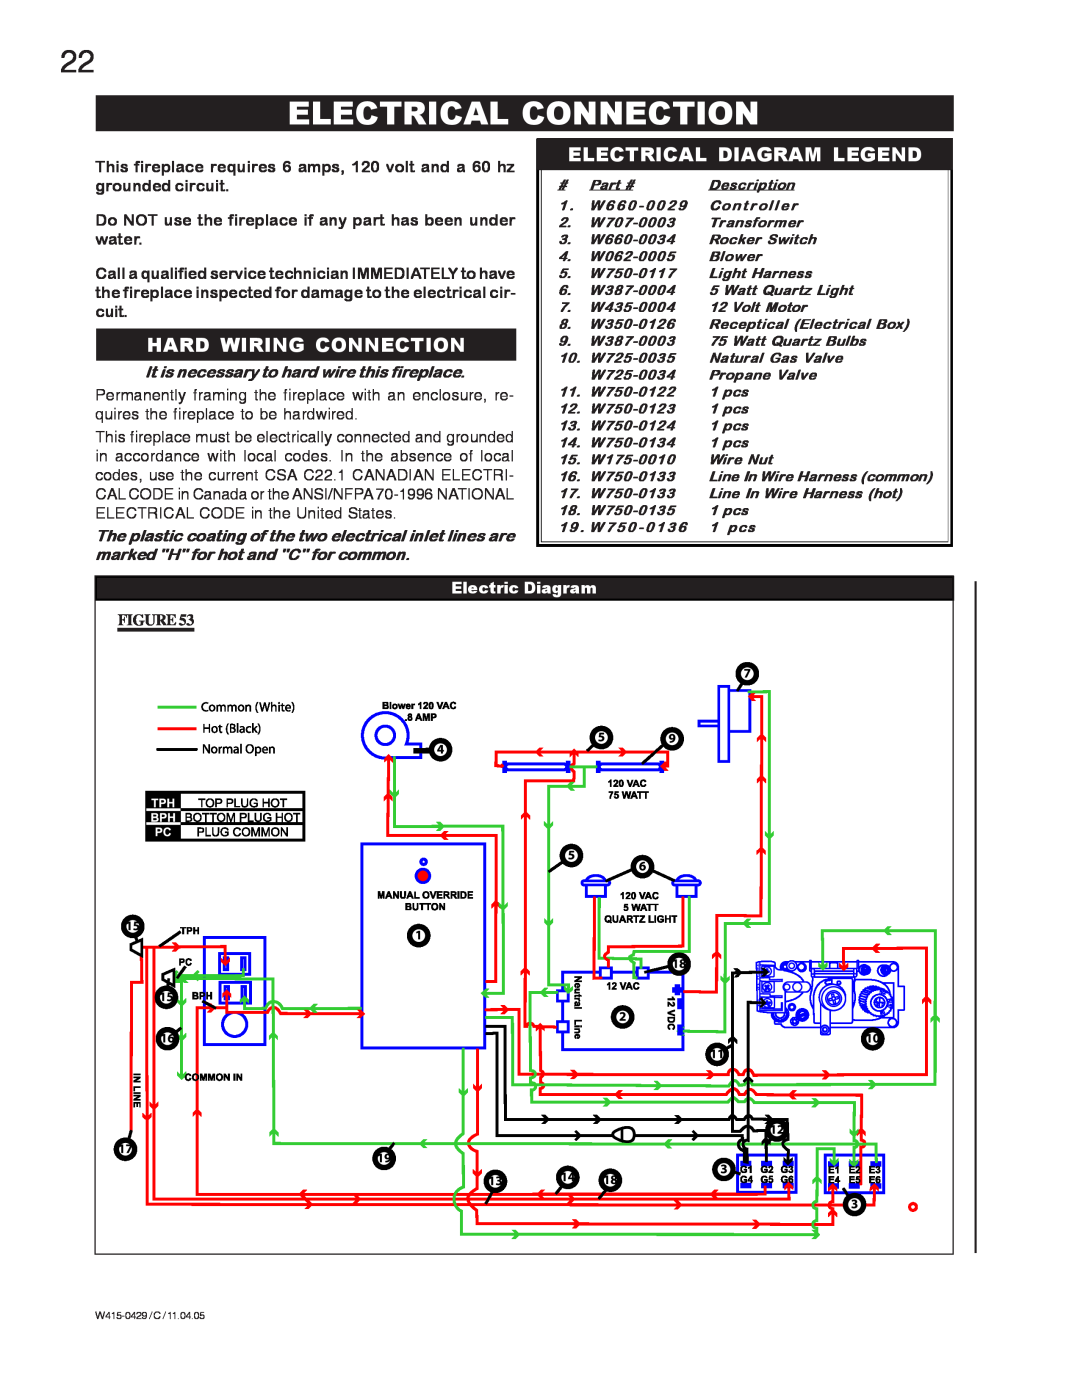 Napoleon Fireplaces GE38PT-M Electrical Connection, Hard Wiring Connection, Electrical Diagram Legend, Electric Diagram 